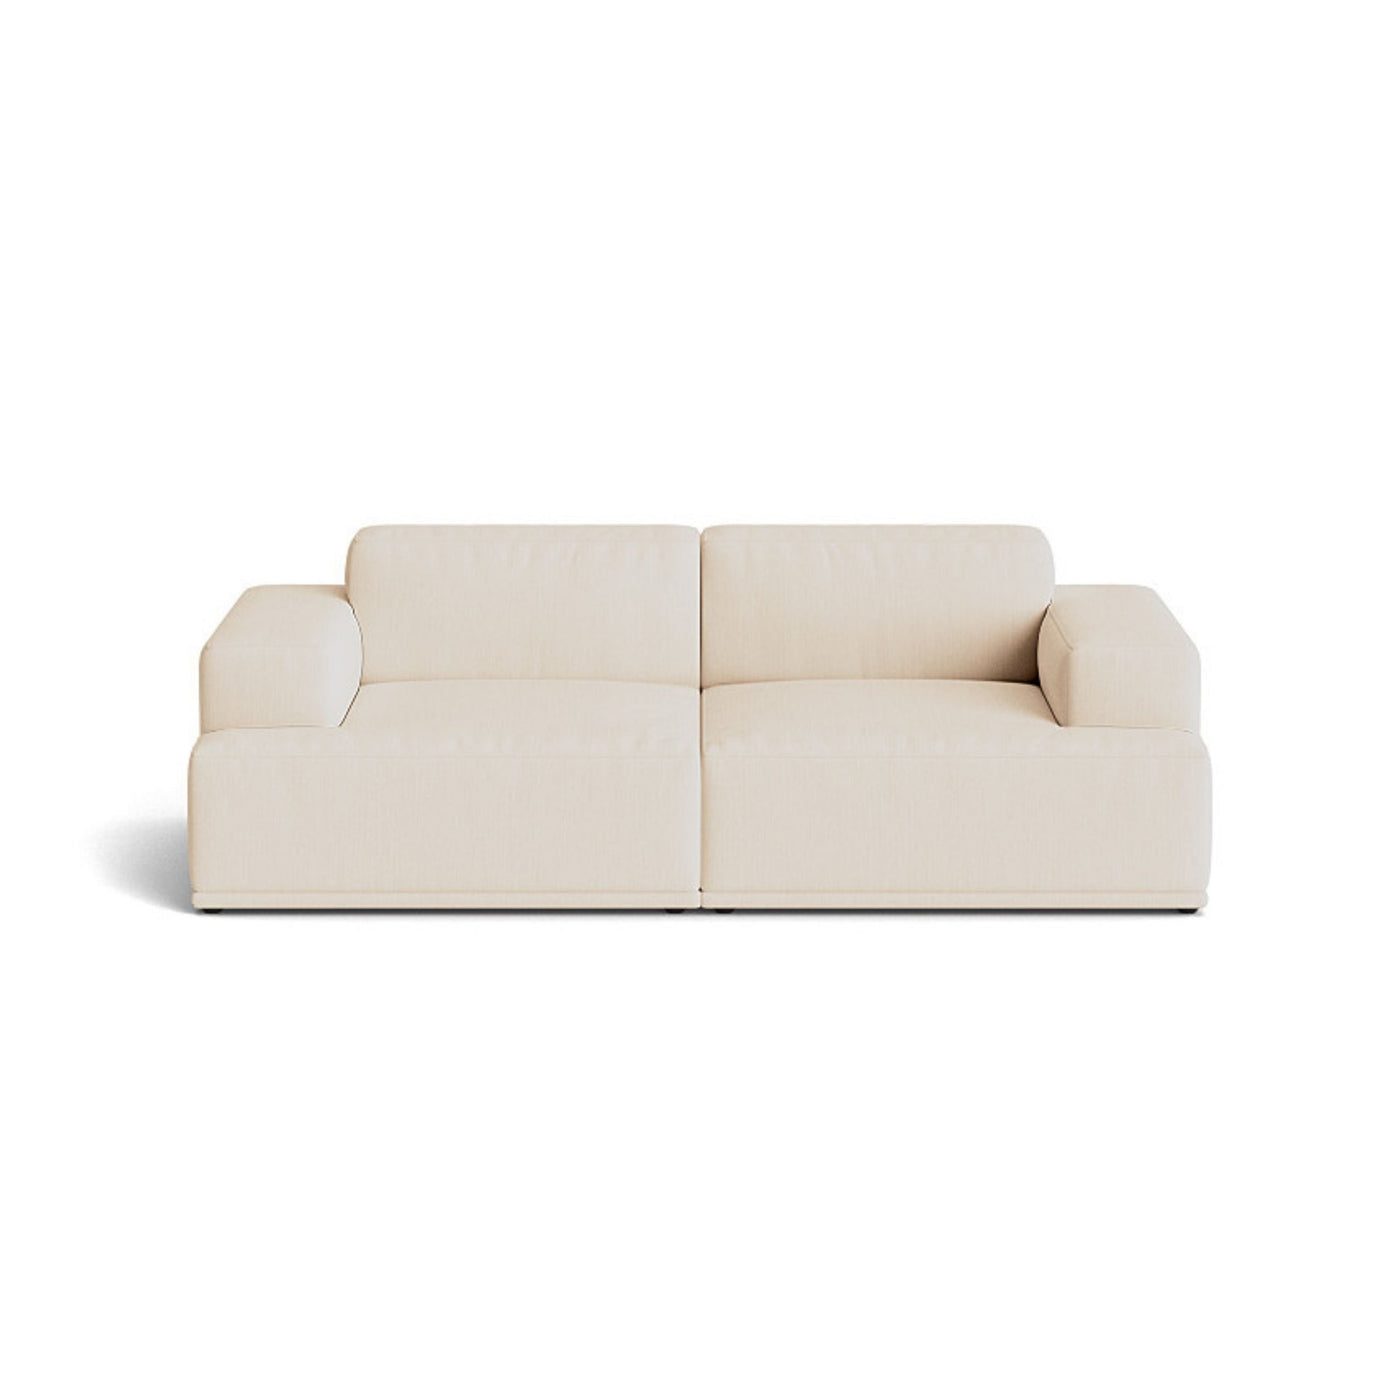 Muuto Connect Soft Modular 2 Seater Sofa, configuration 1. made-to-order from someday designs. #colour_balder-212